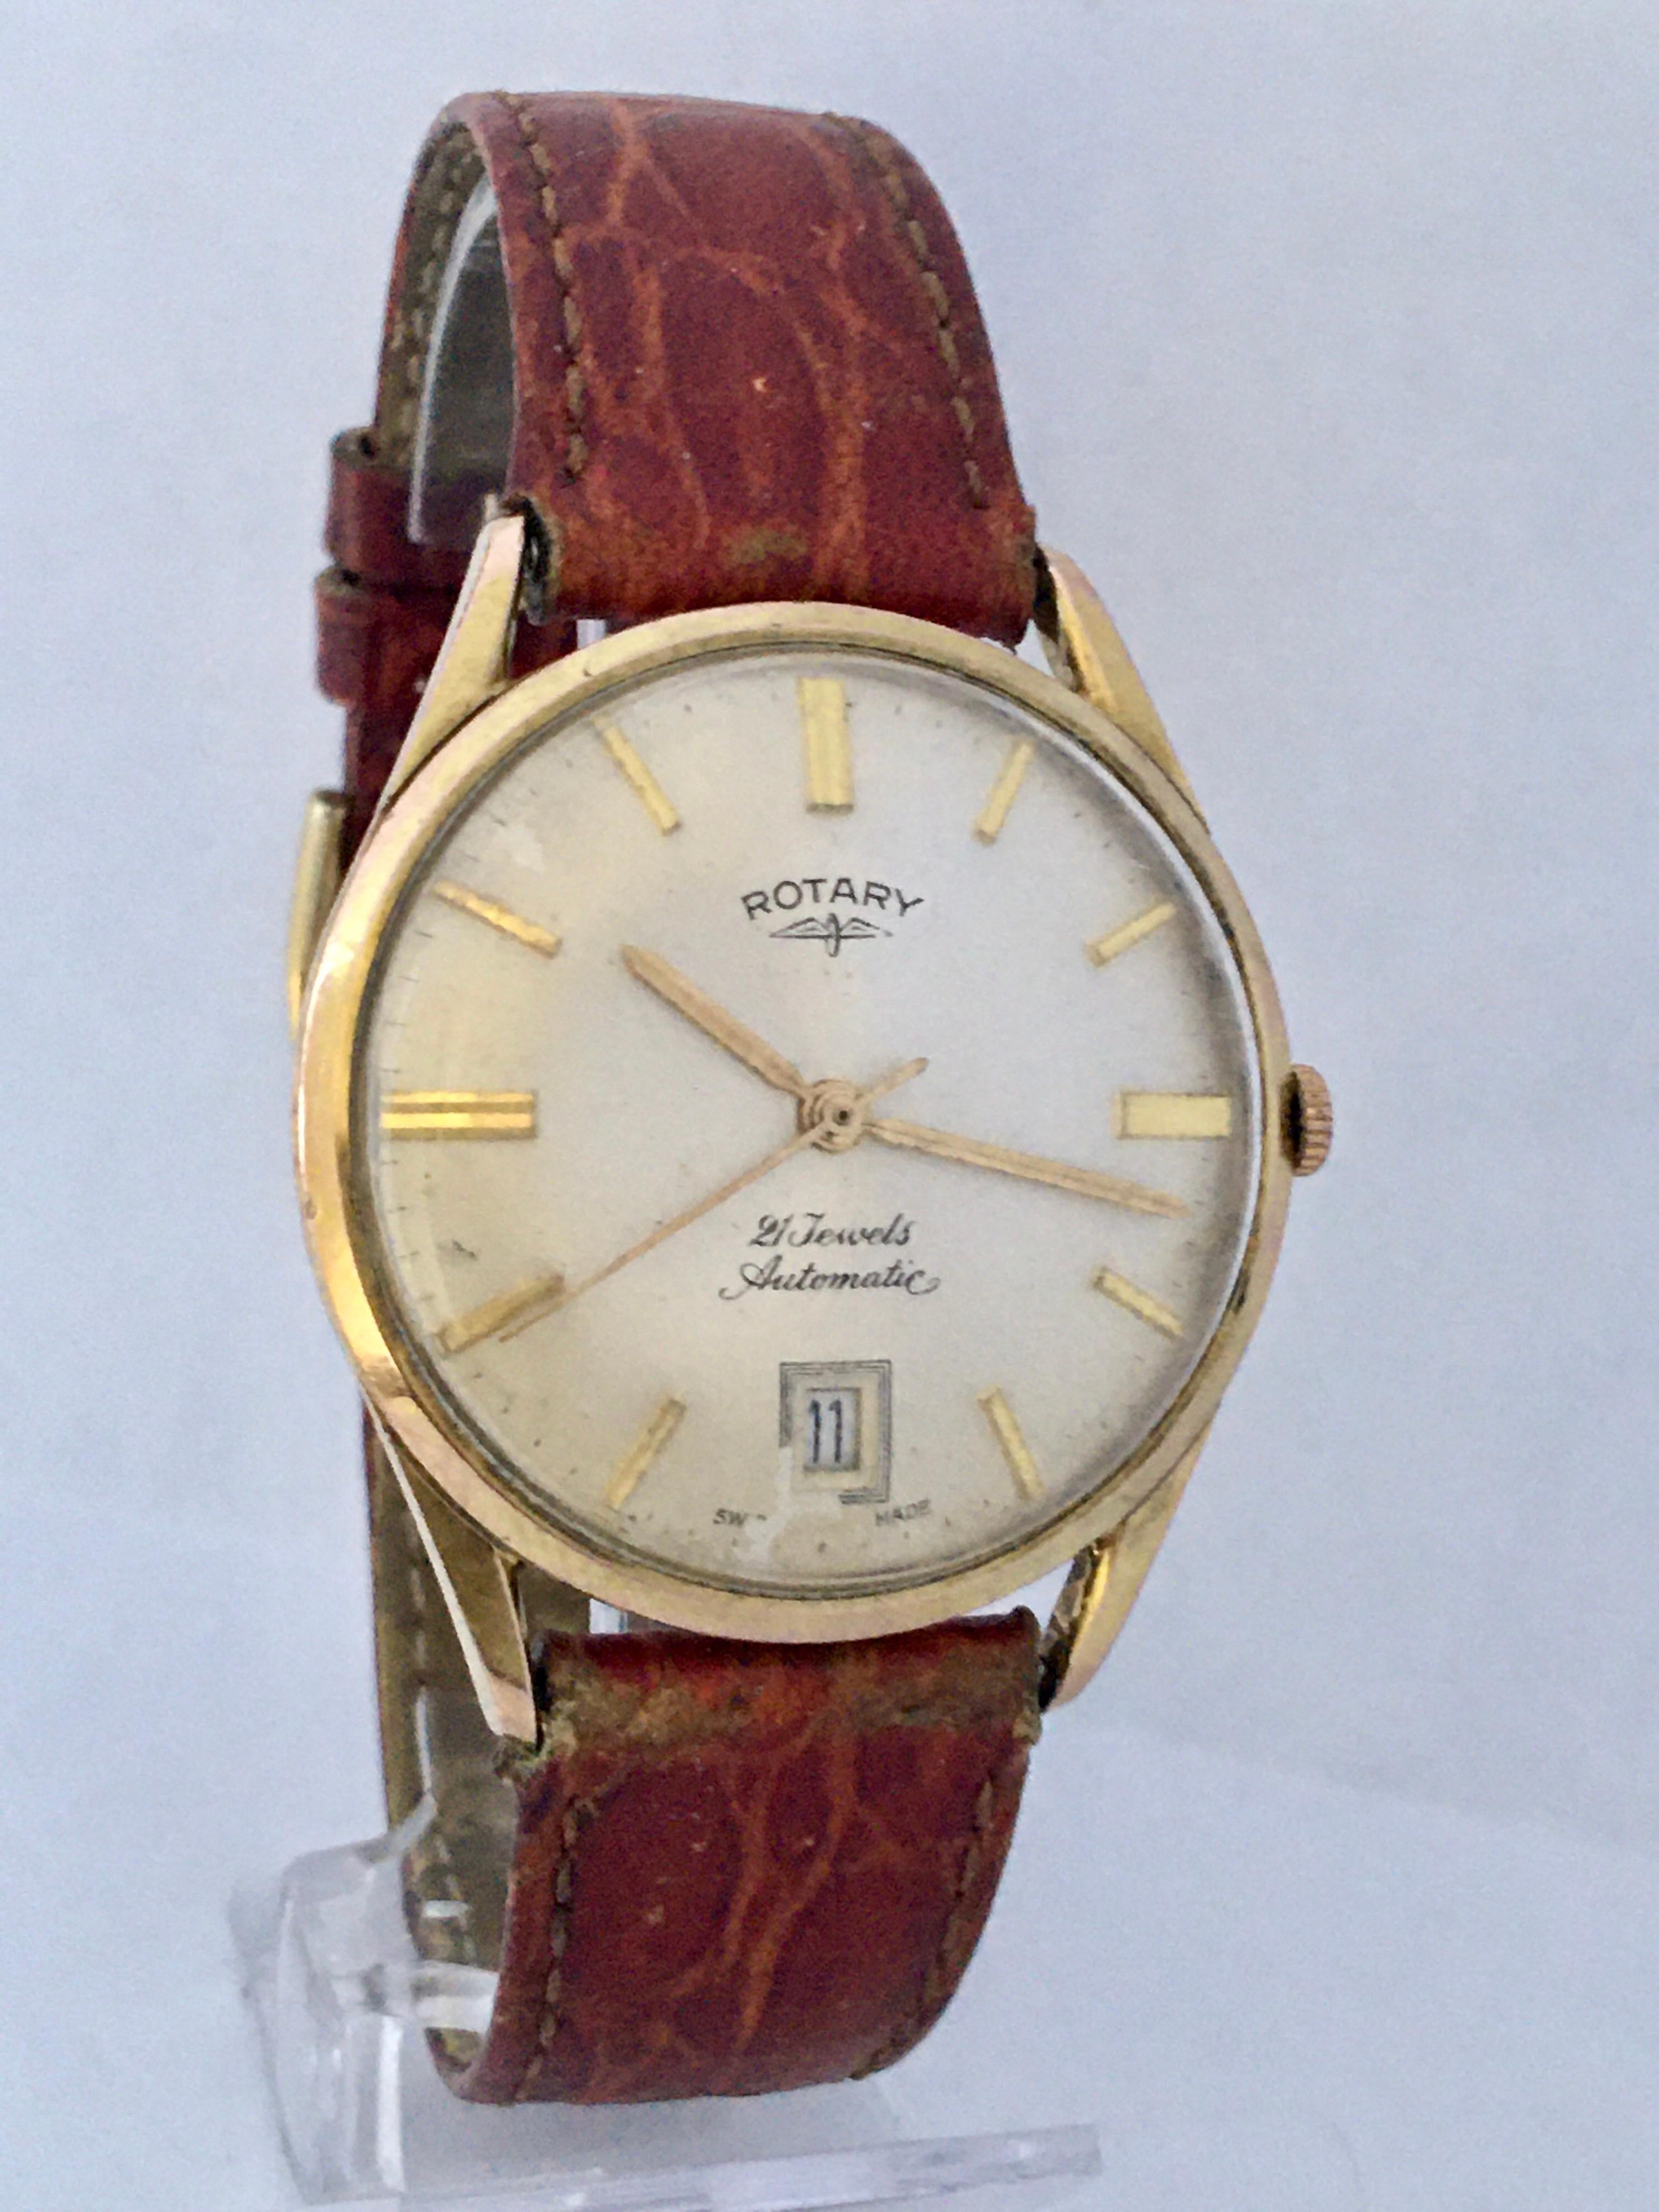 Vintage 1960s Gold-Plated Rotary 21 Jewels Automatic Watch For Sale 1